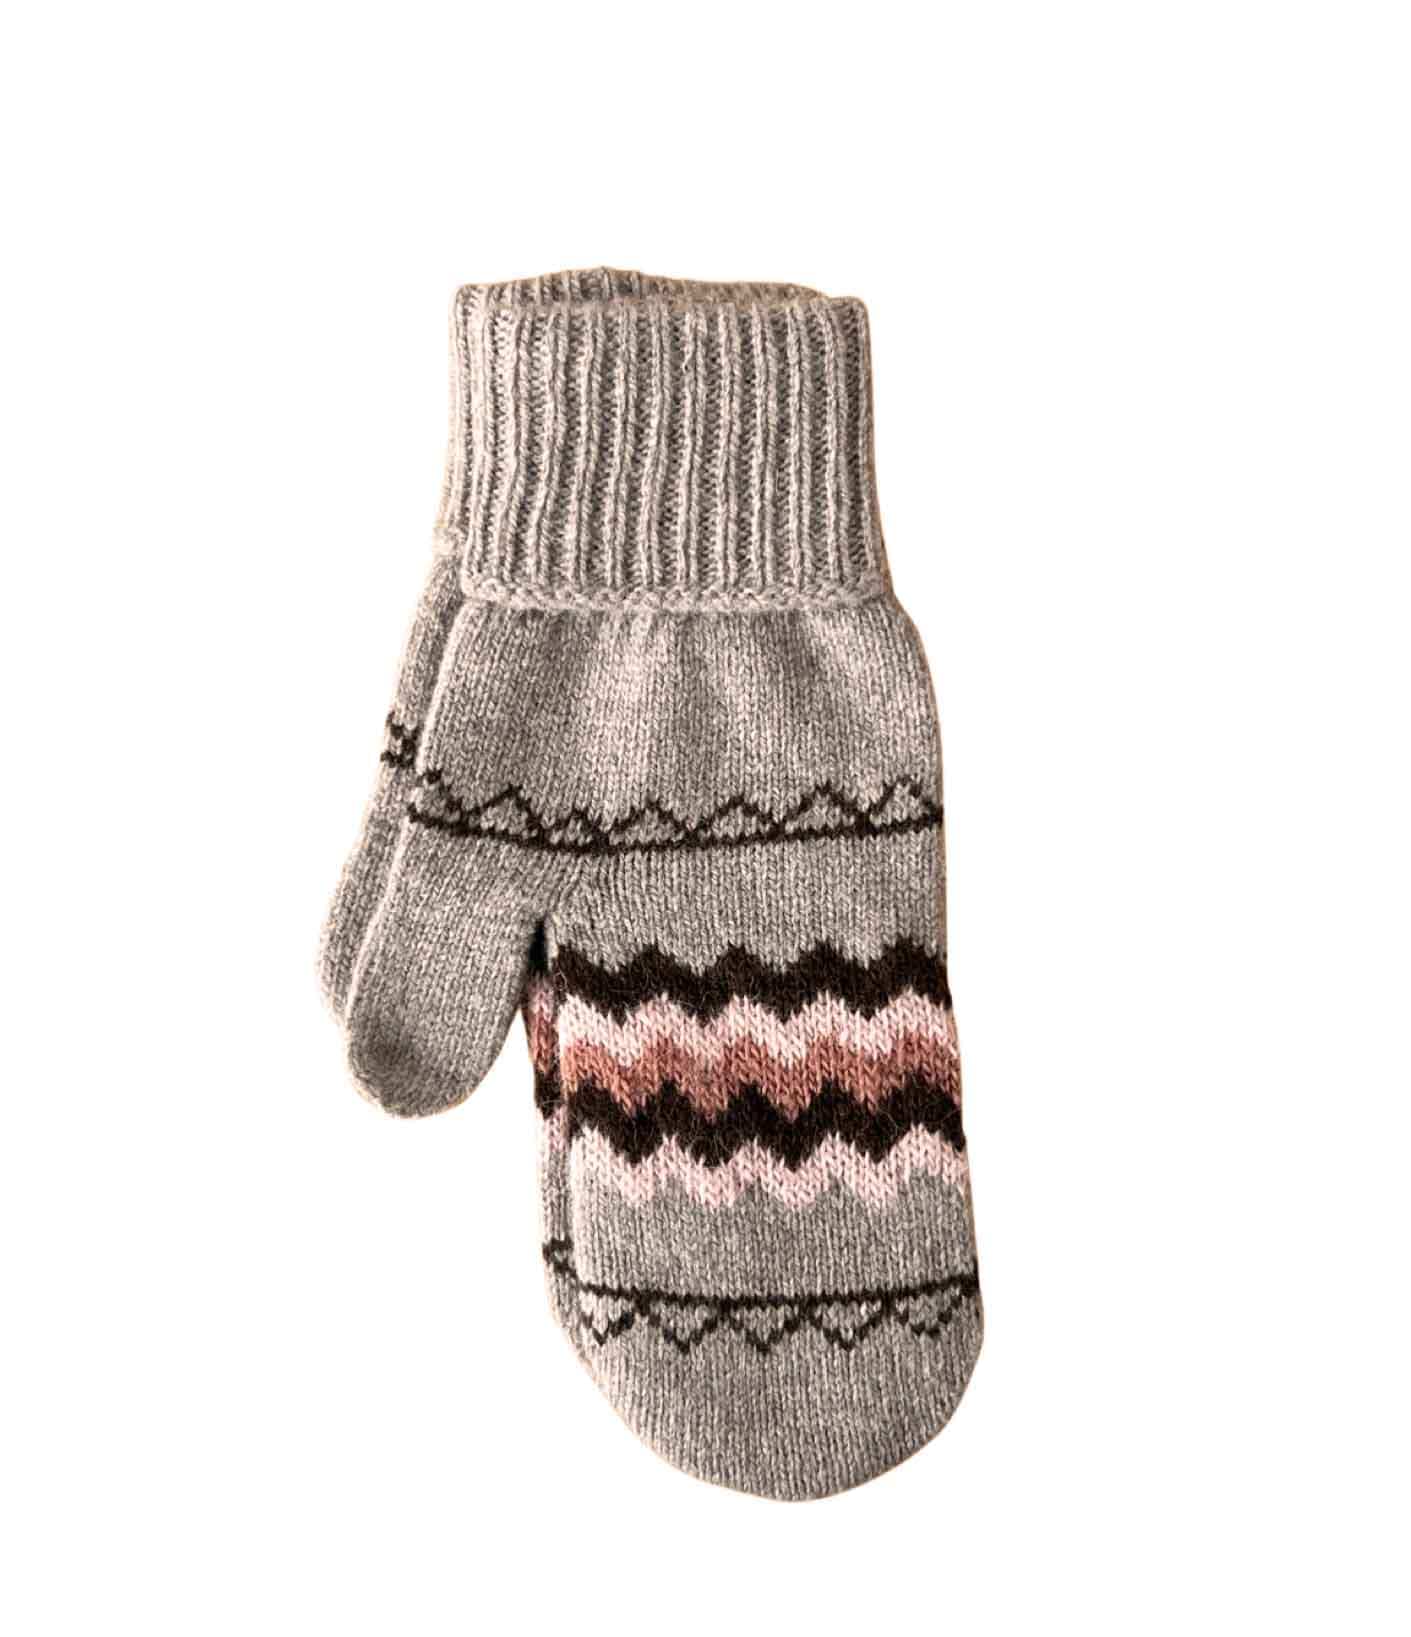 Icelandic wool mittens with traditional Icelandic pattern